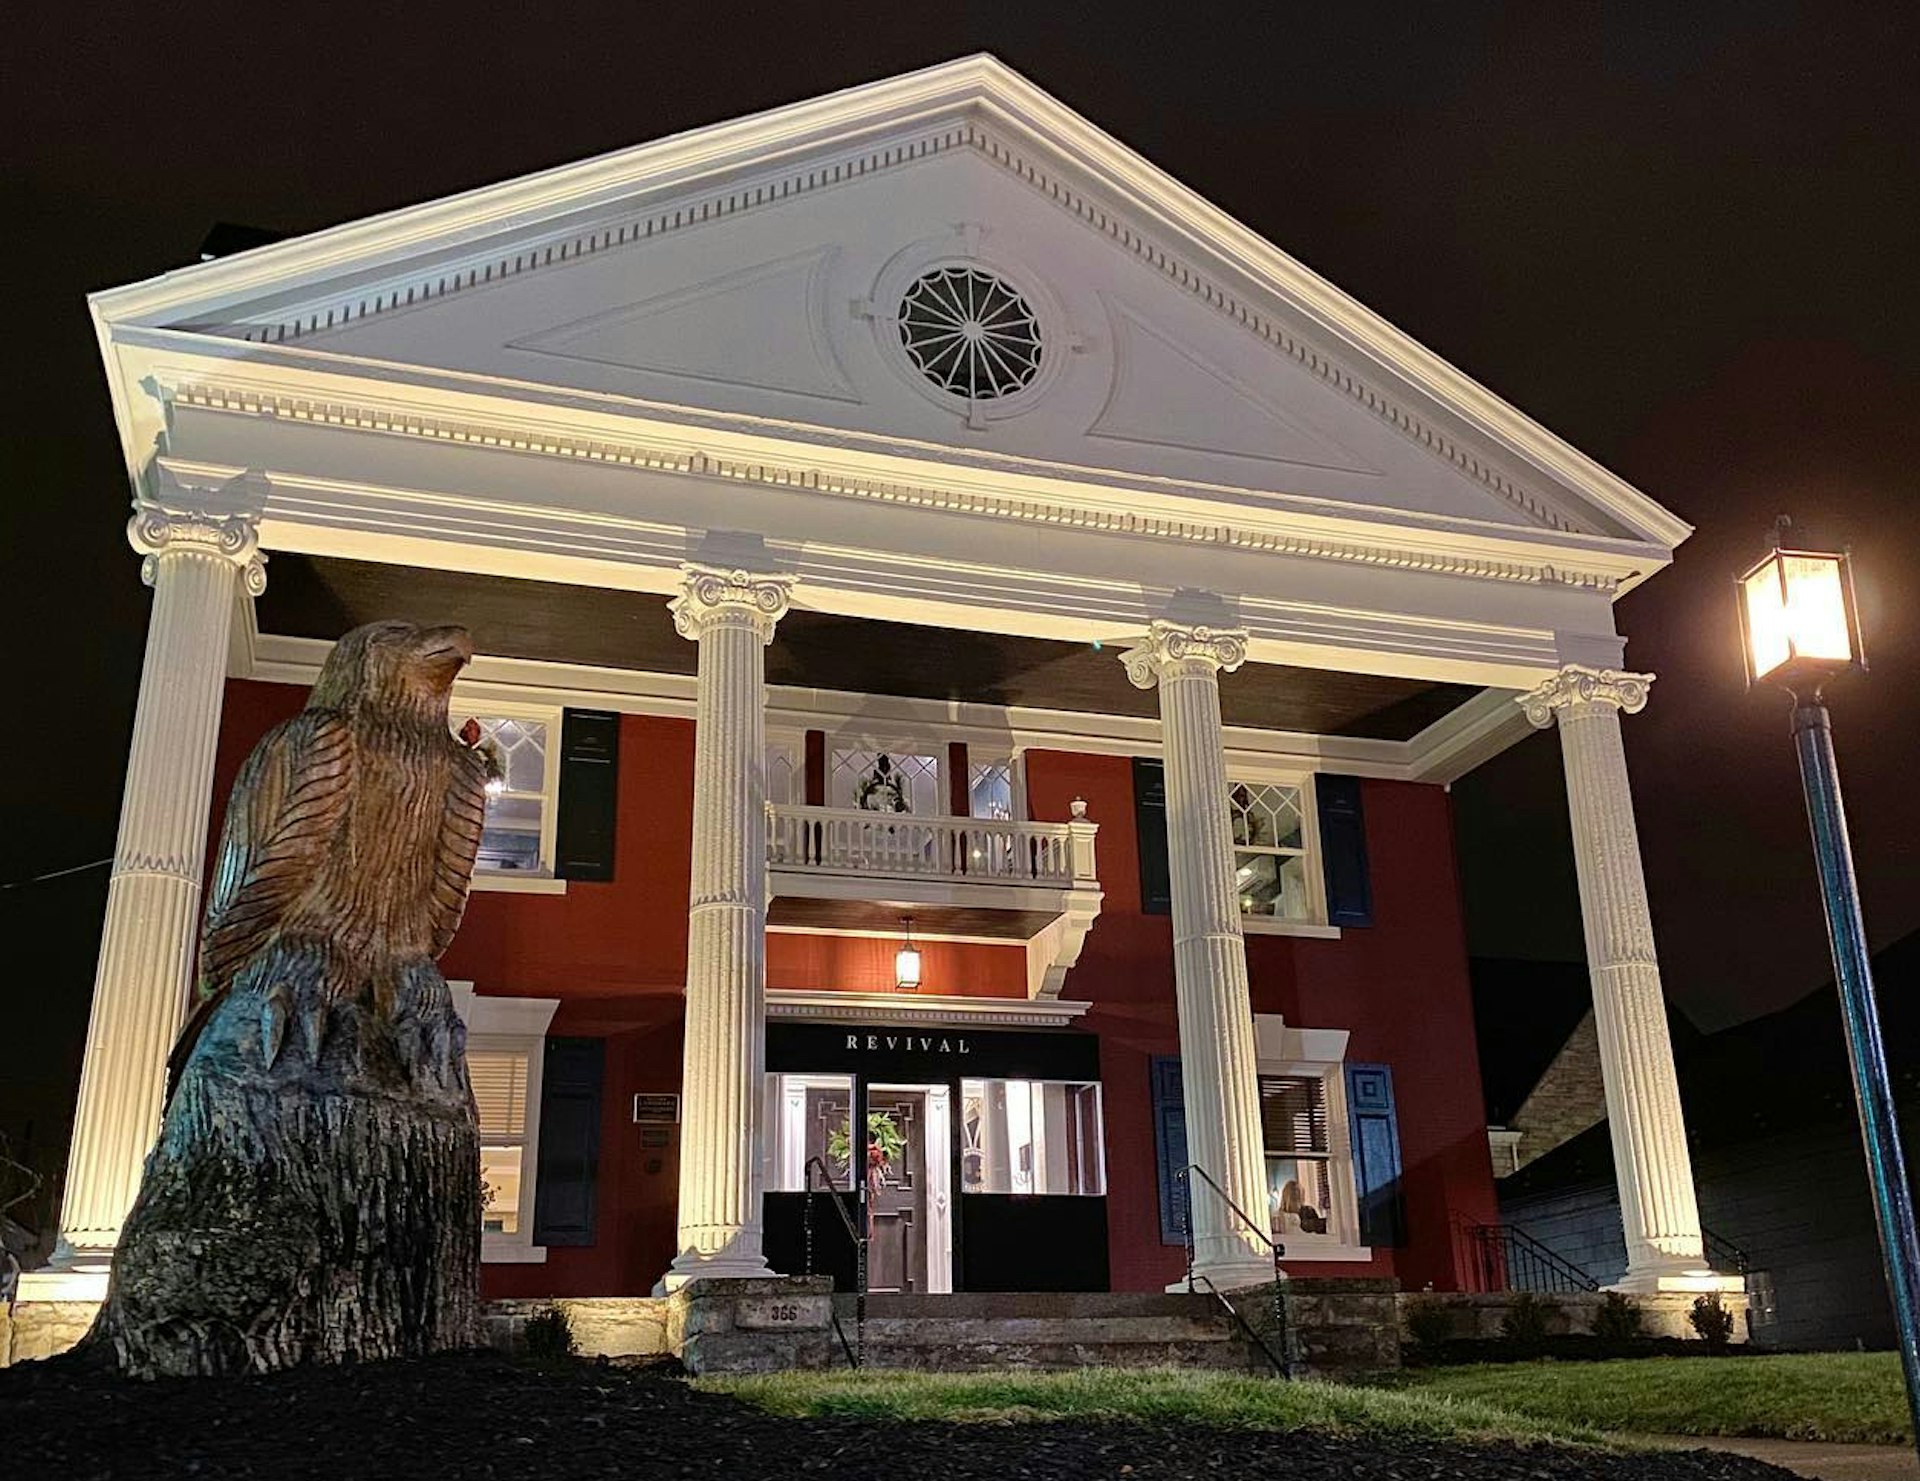 The exterior of Revival on Lincoln at night shows a red brick two story building with four white Ionic columns and a Federal style roof with a large sculpture of an eagle in the foreground